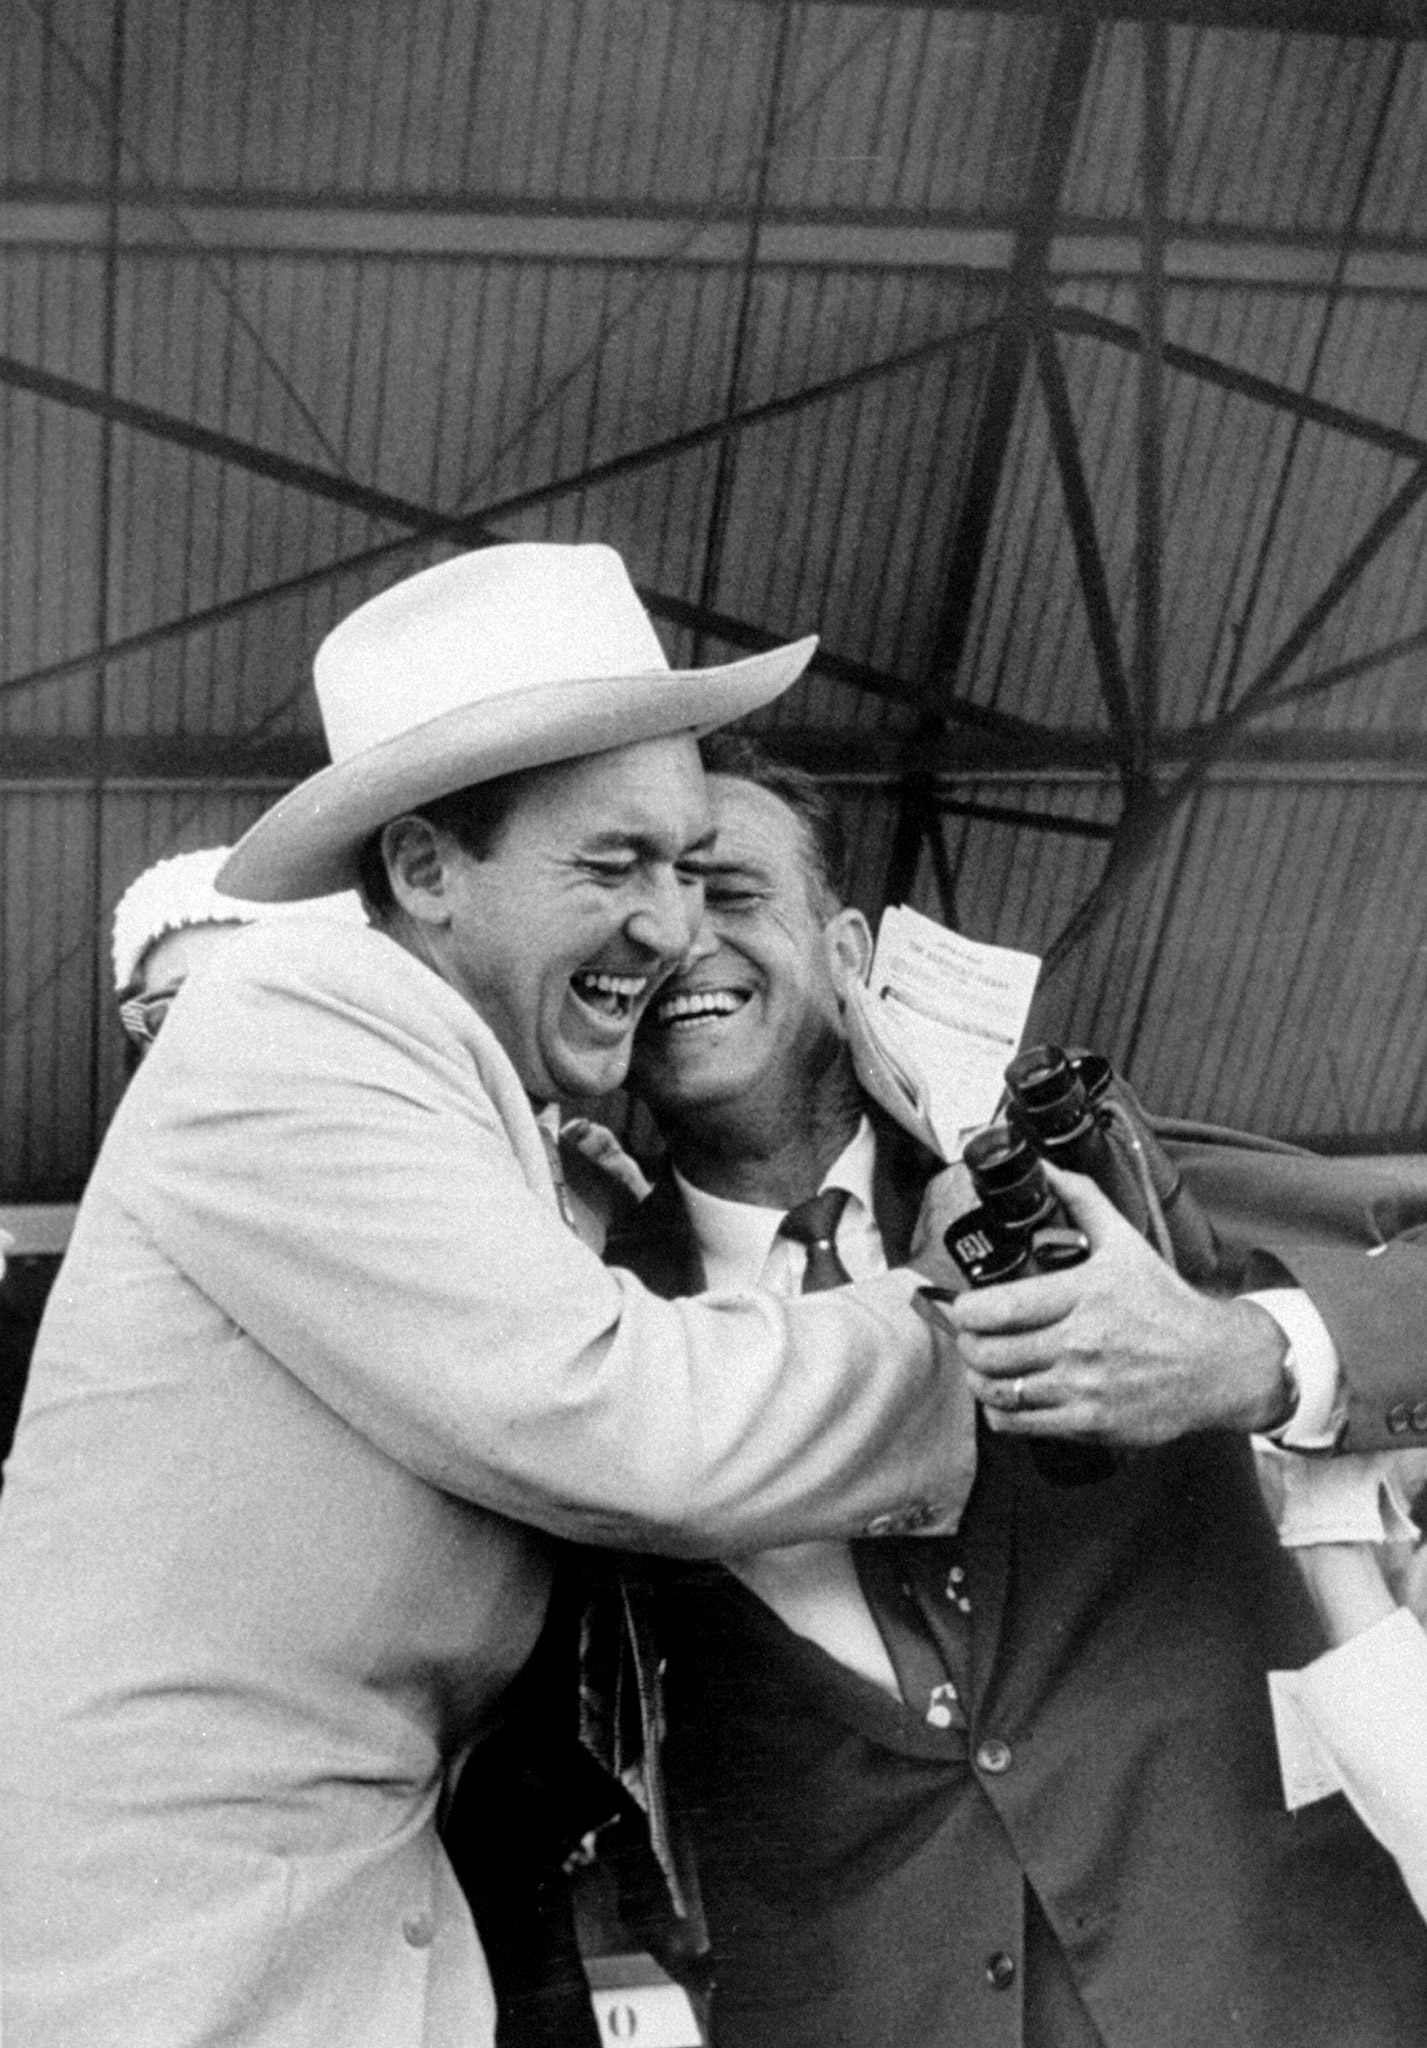 Owner of race horse "Needles", Bonnie Heath and co-owner, Jackson C. Dudley, Hug as "Needles" flashes across the finish line the winner, at the Kentucky Derby, 1956.